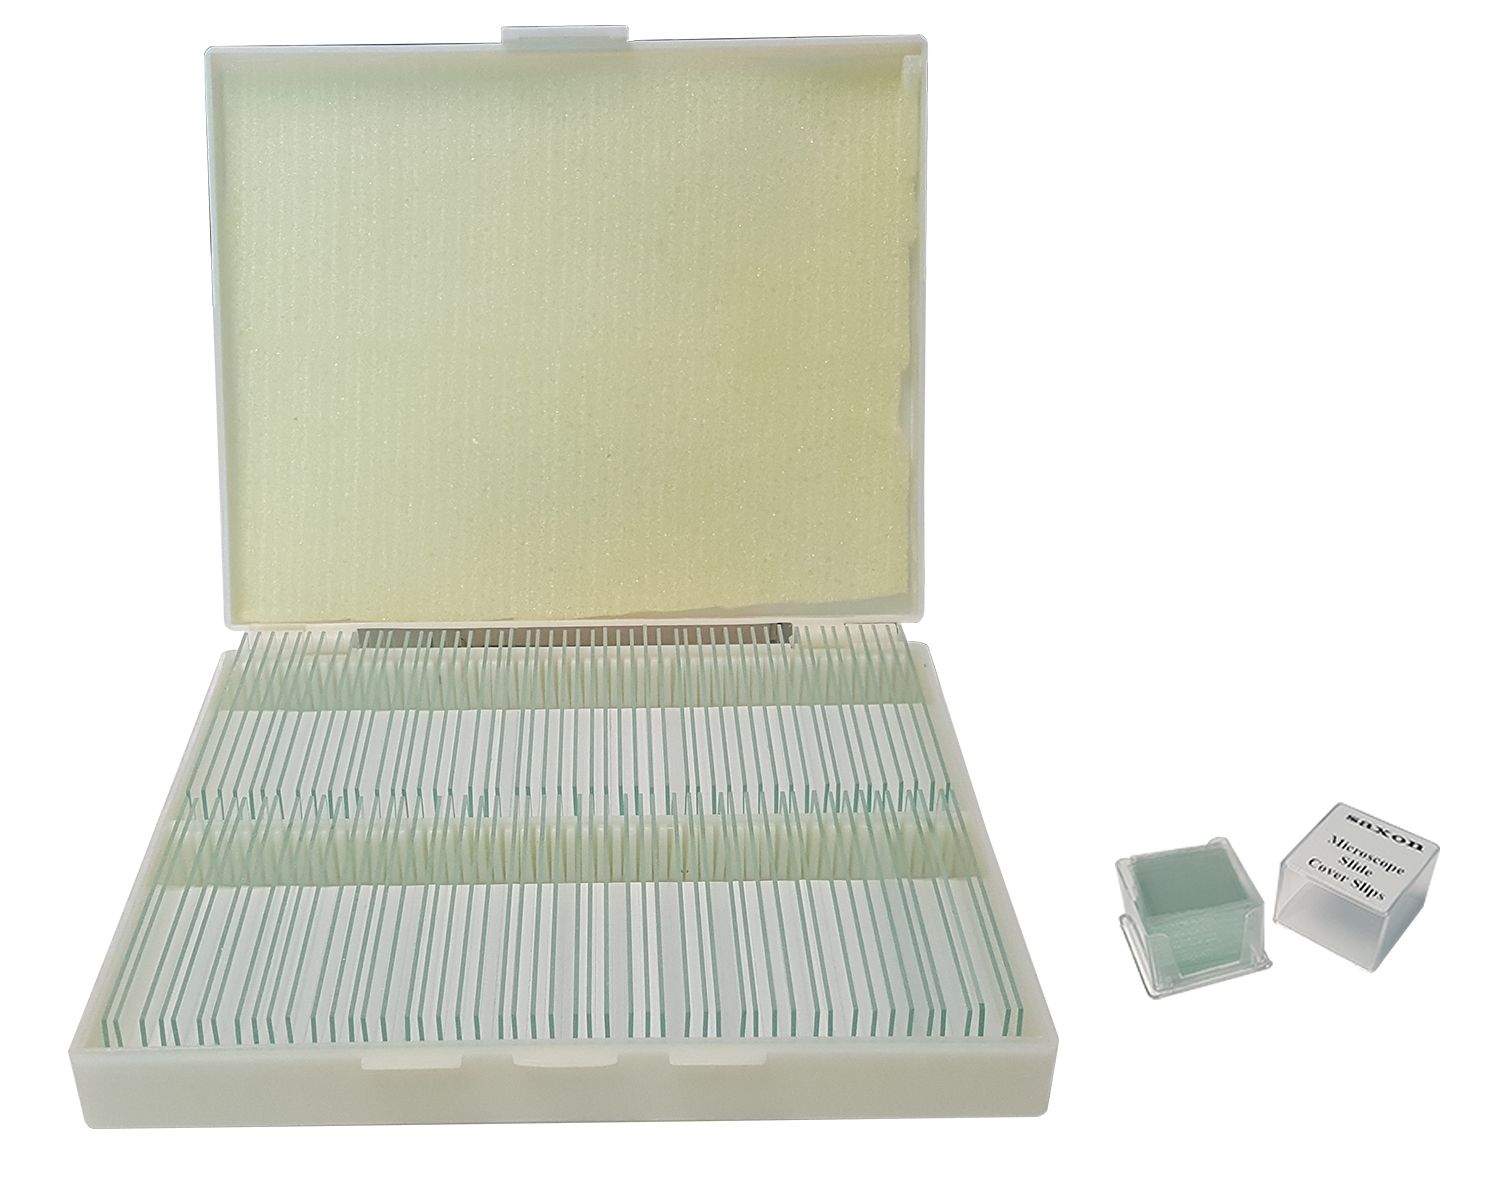 Saxon 100 pre-cleaned blank slides for biological microscopes.